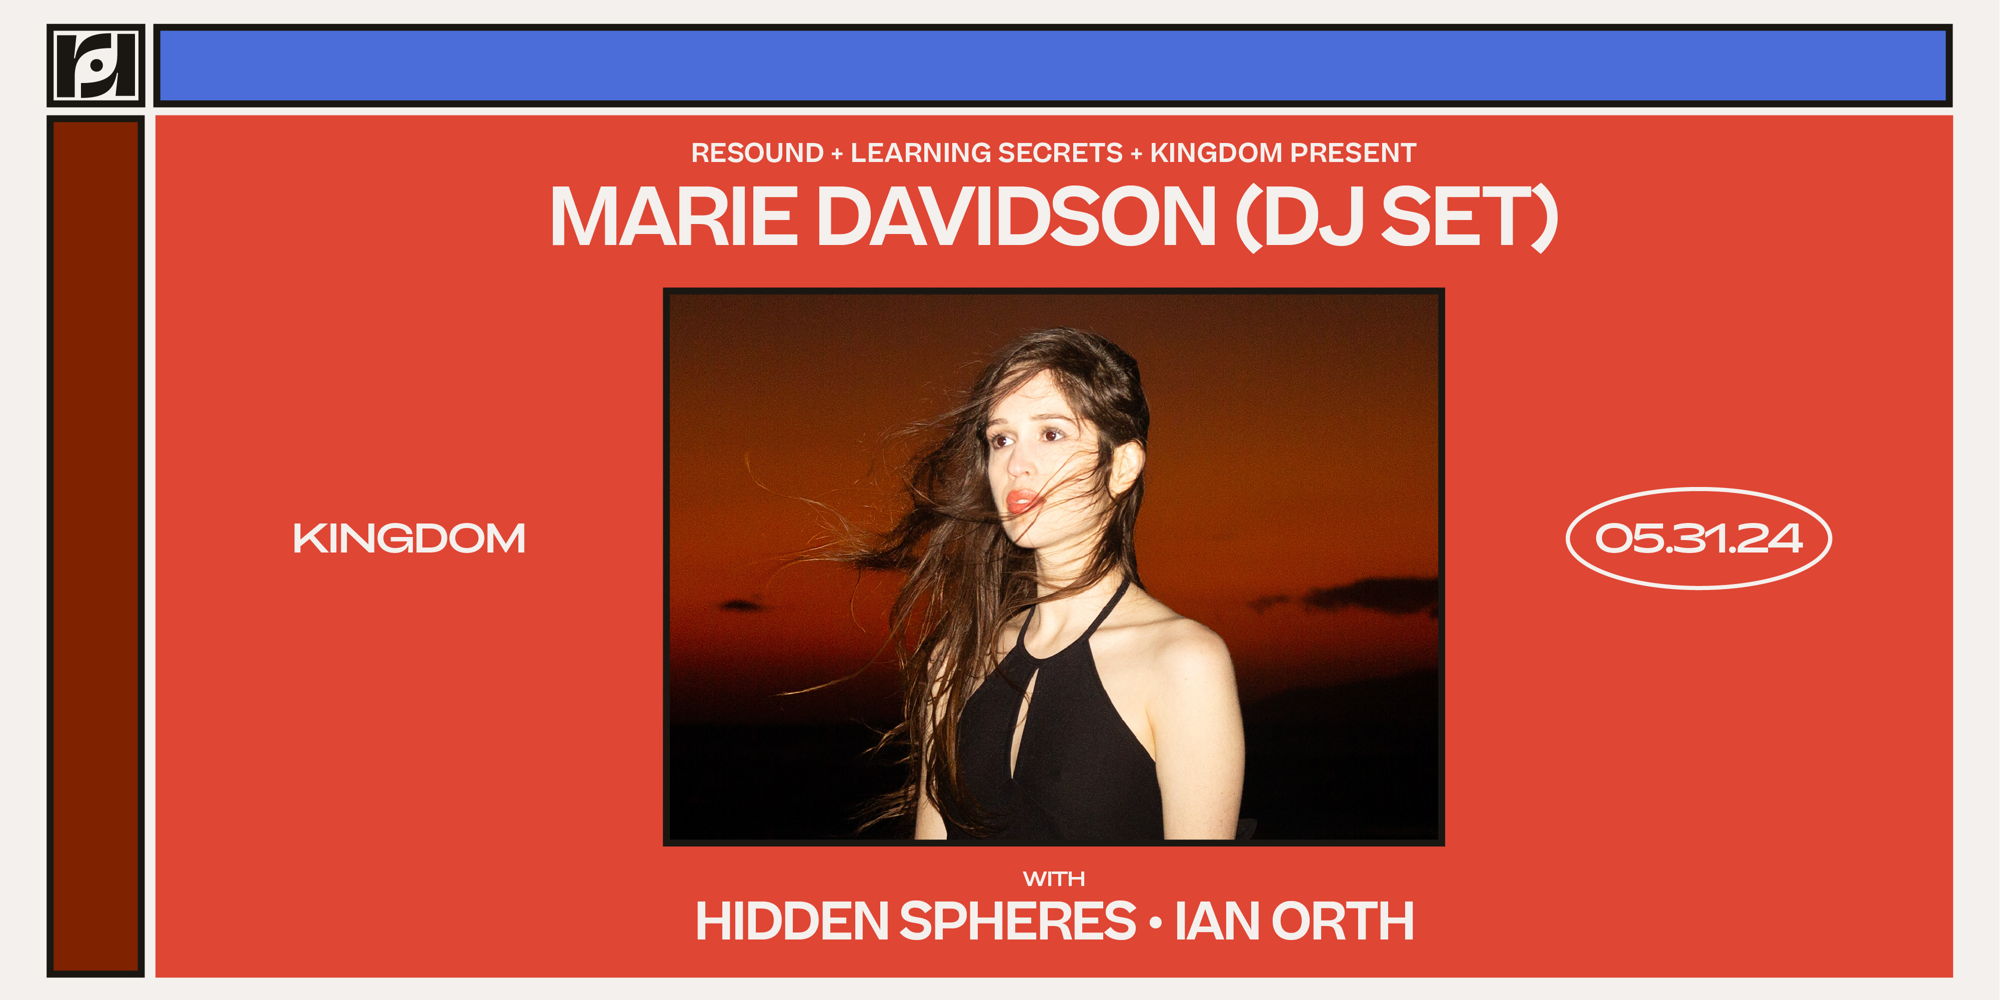 Resound Presents: Marie Davidson w/ Hidden Spheres & Ian Orth at Kingdom on 5/31 promotional image